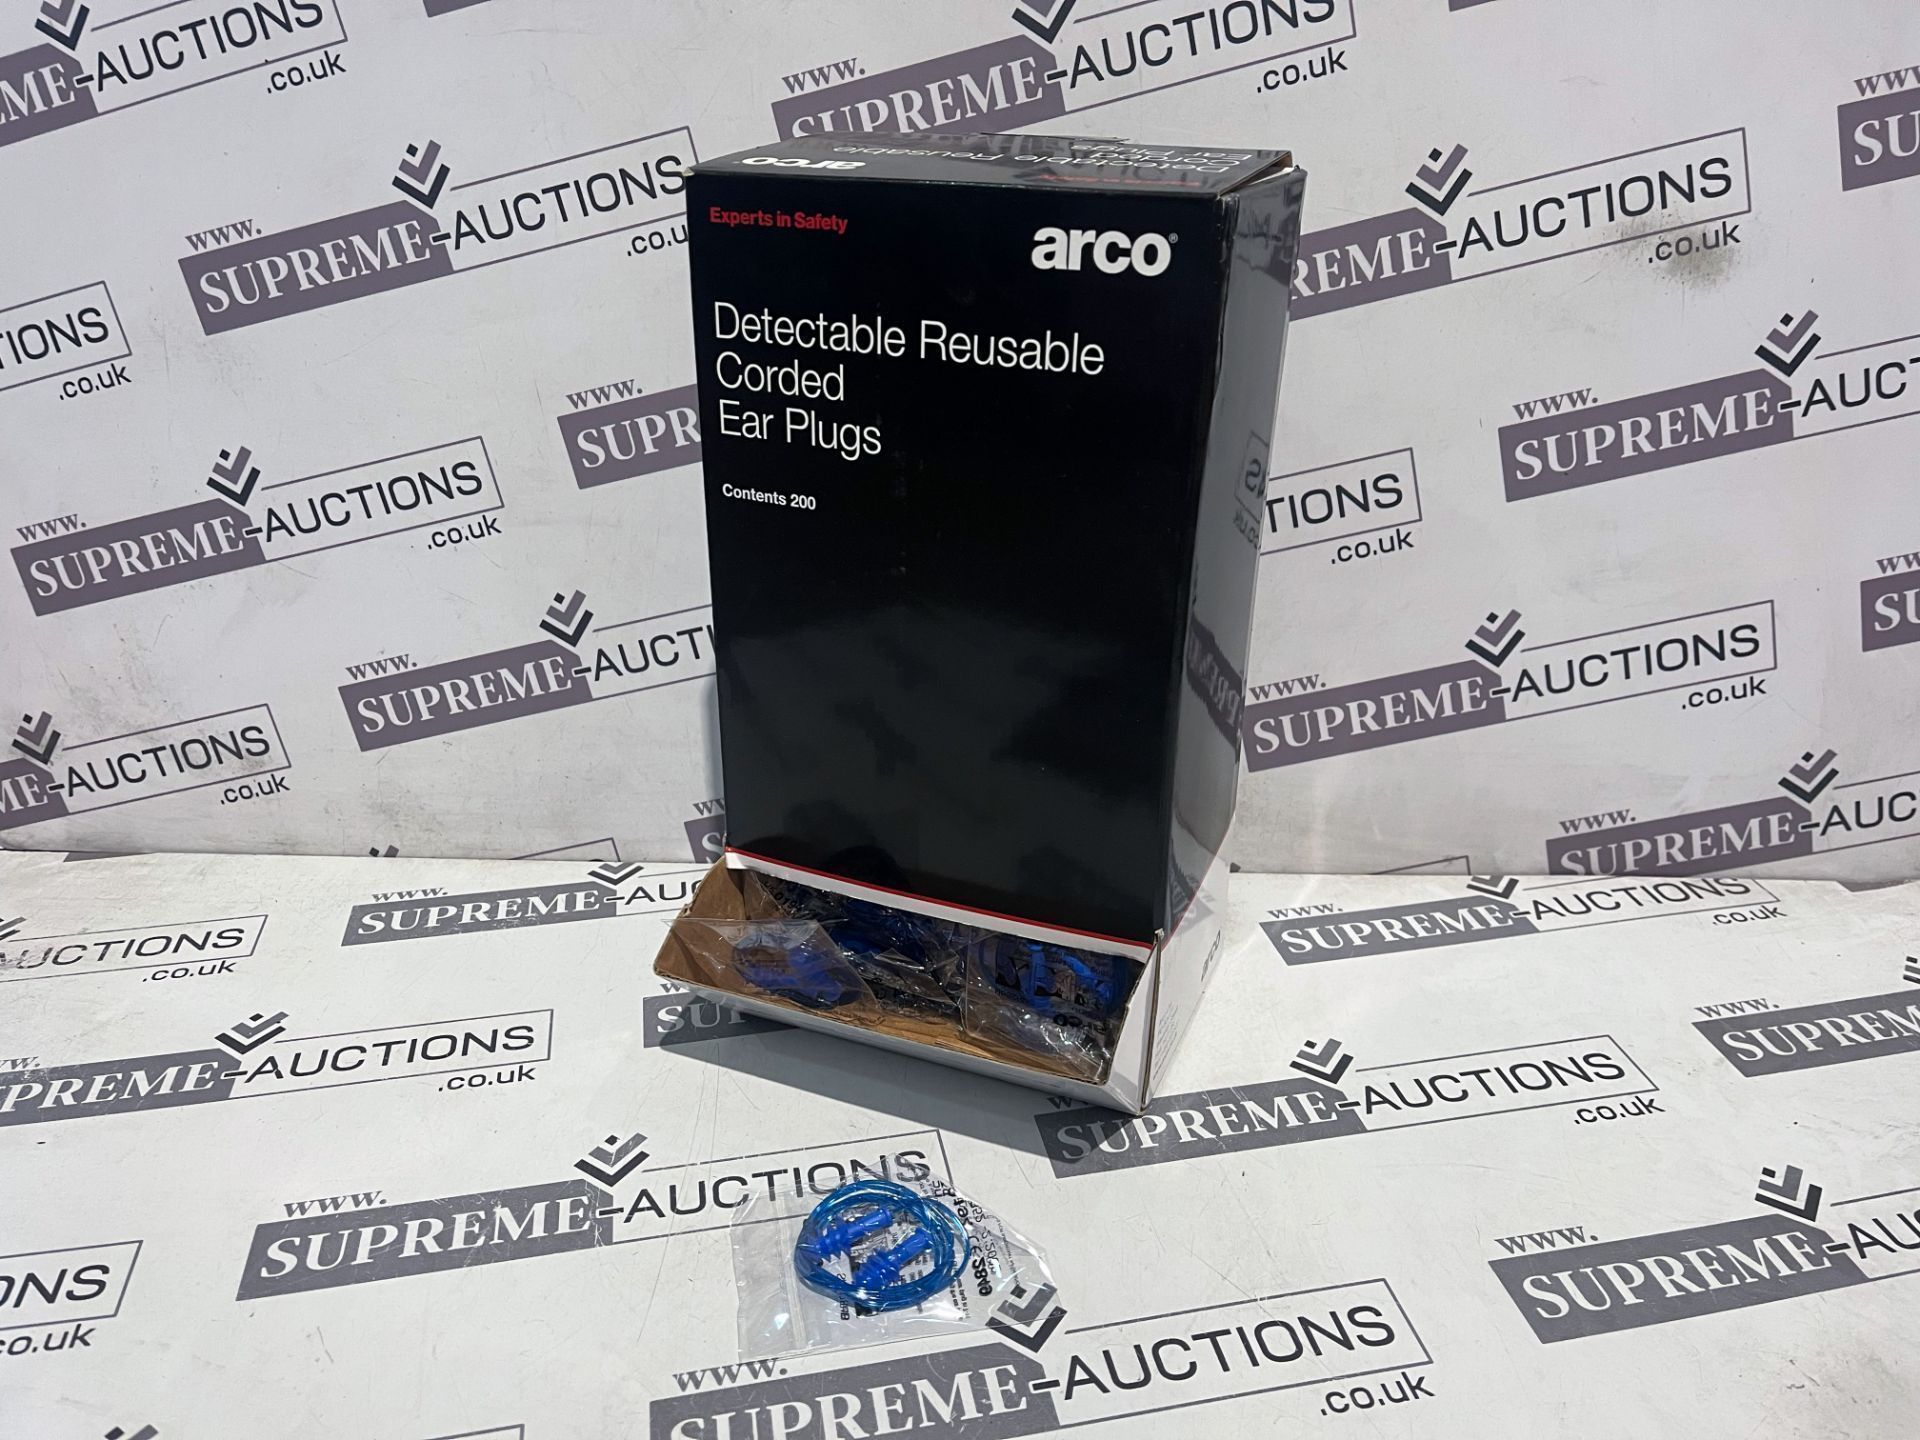 TRADE LOT 10 X BRAND NEW PACK OF 200 ARCO CORDED DETECTABLE REUSABLE EARPLUGS RRP £299 PER PACK